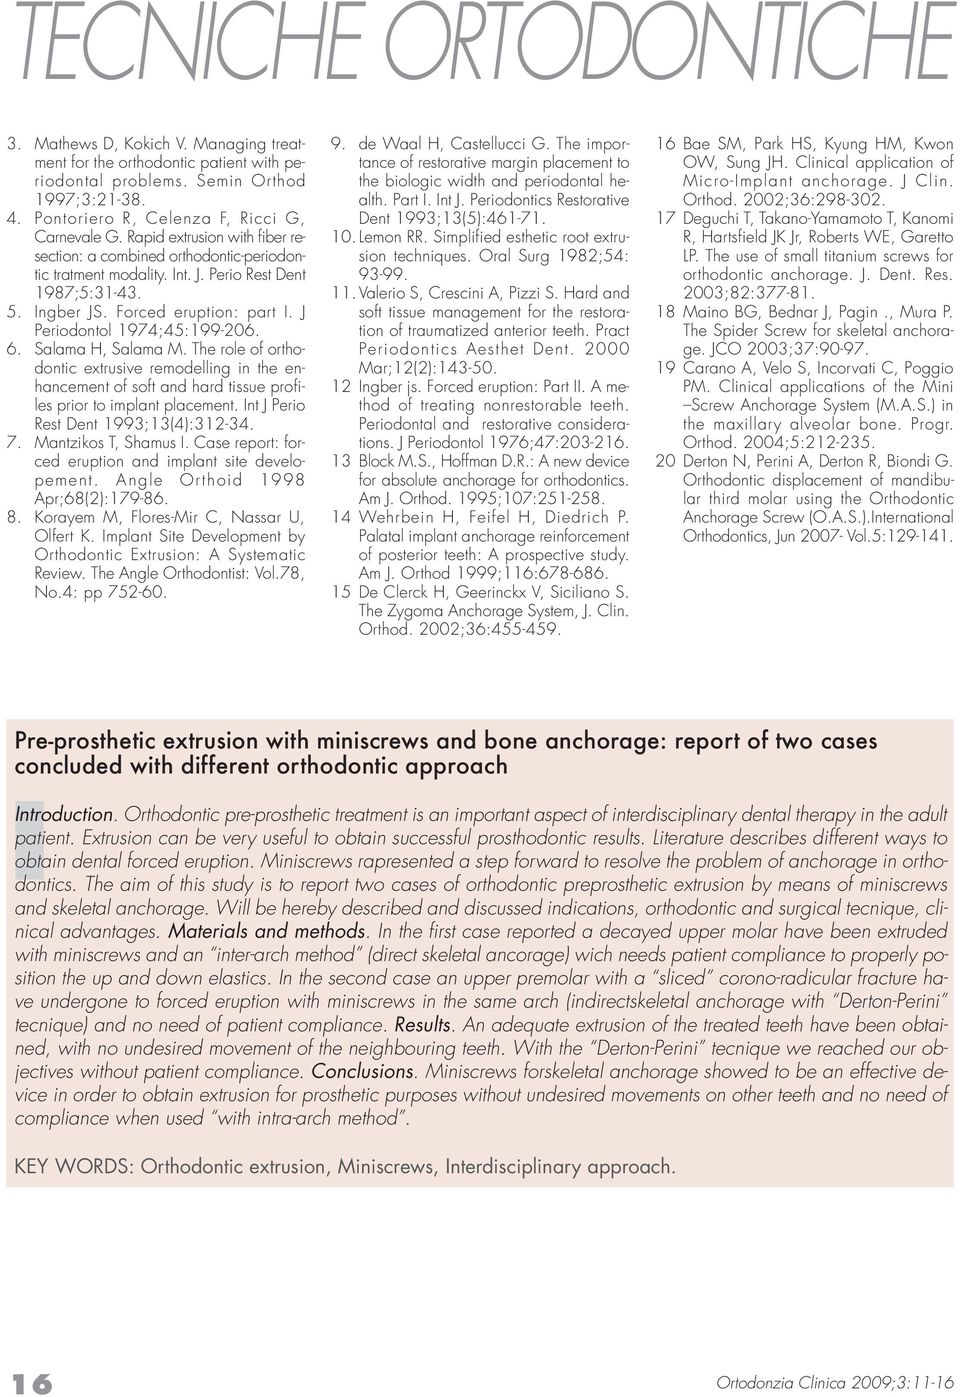 6. Salama H, Salama M. The role of orthodontic extrusive remodelling in the enhancement of soft and hard tissue profiles prior to implant placement. Int J Perio Rest Dent 1993;13(4):312-34. 7.